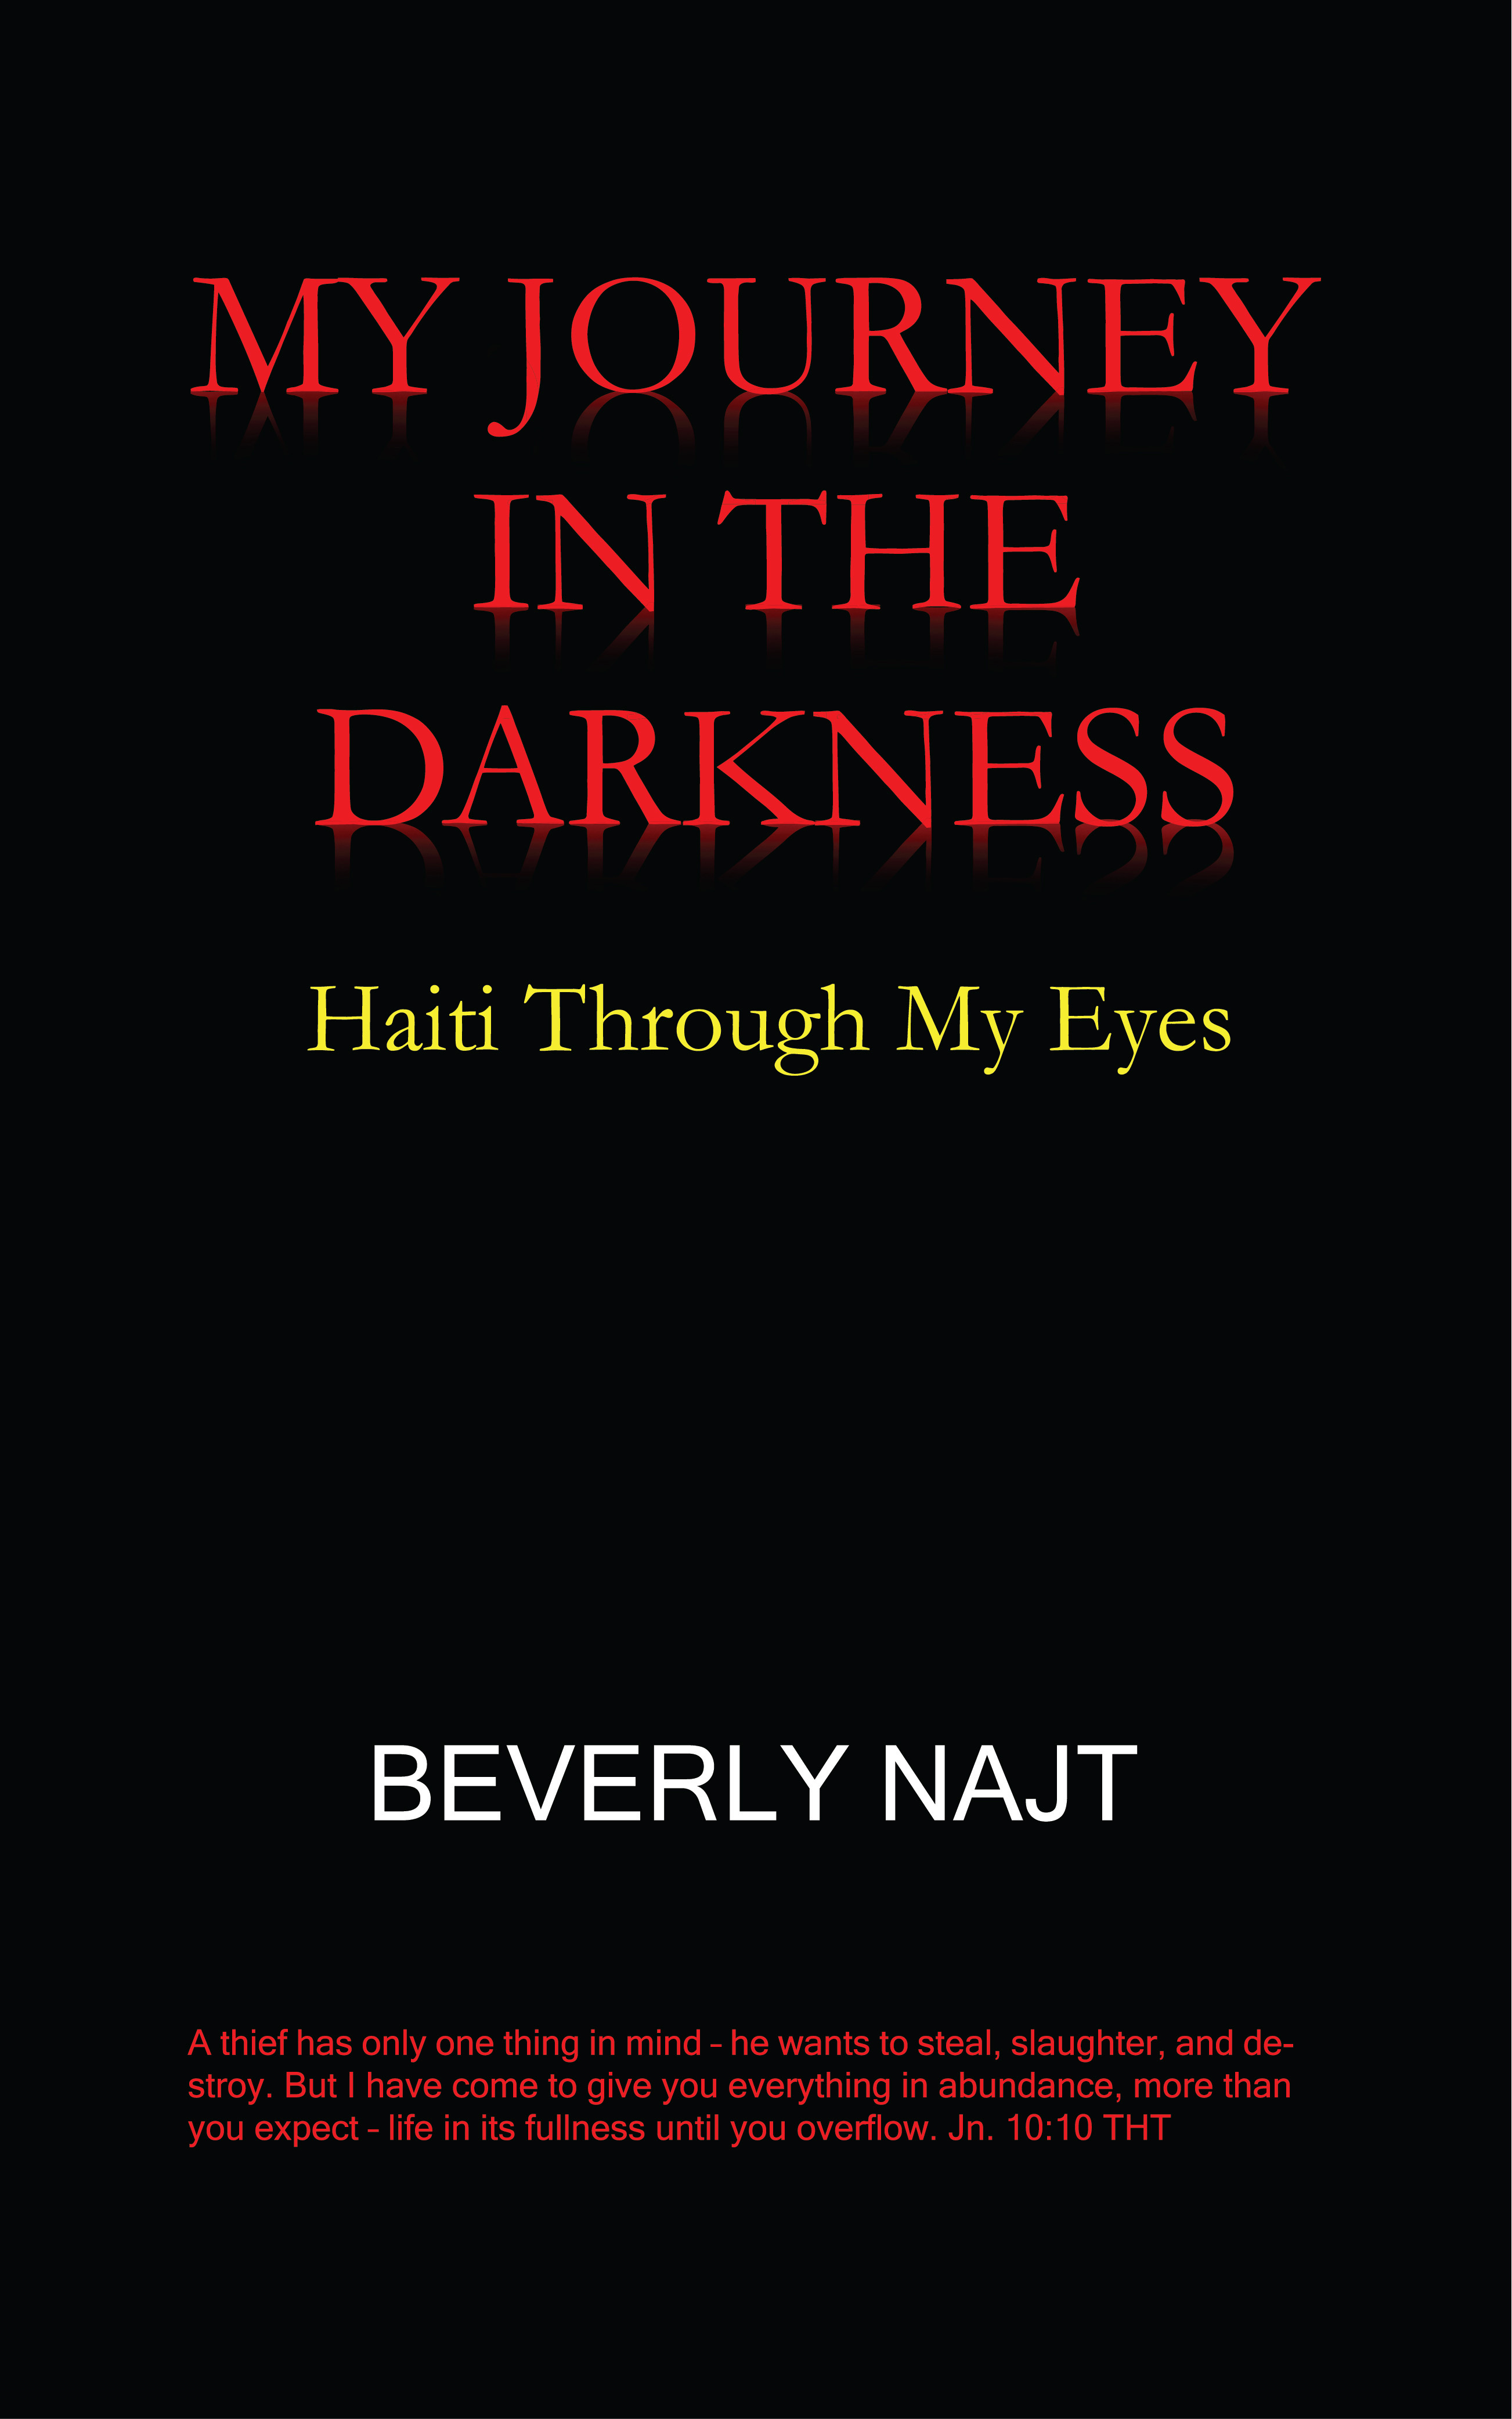 My Journey in the Darkness